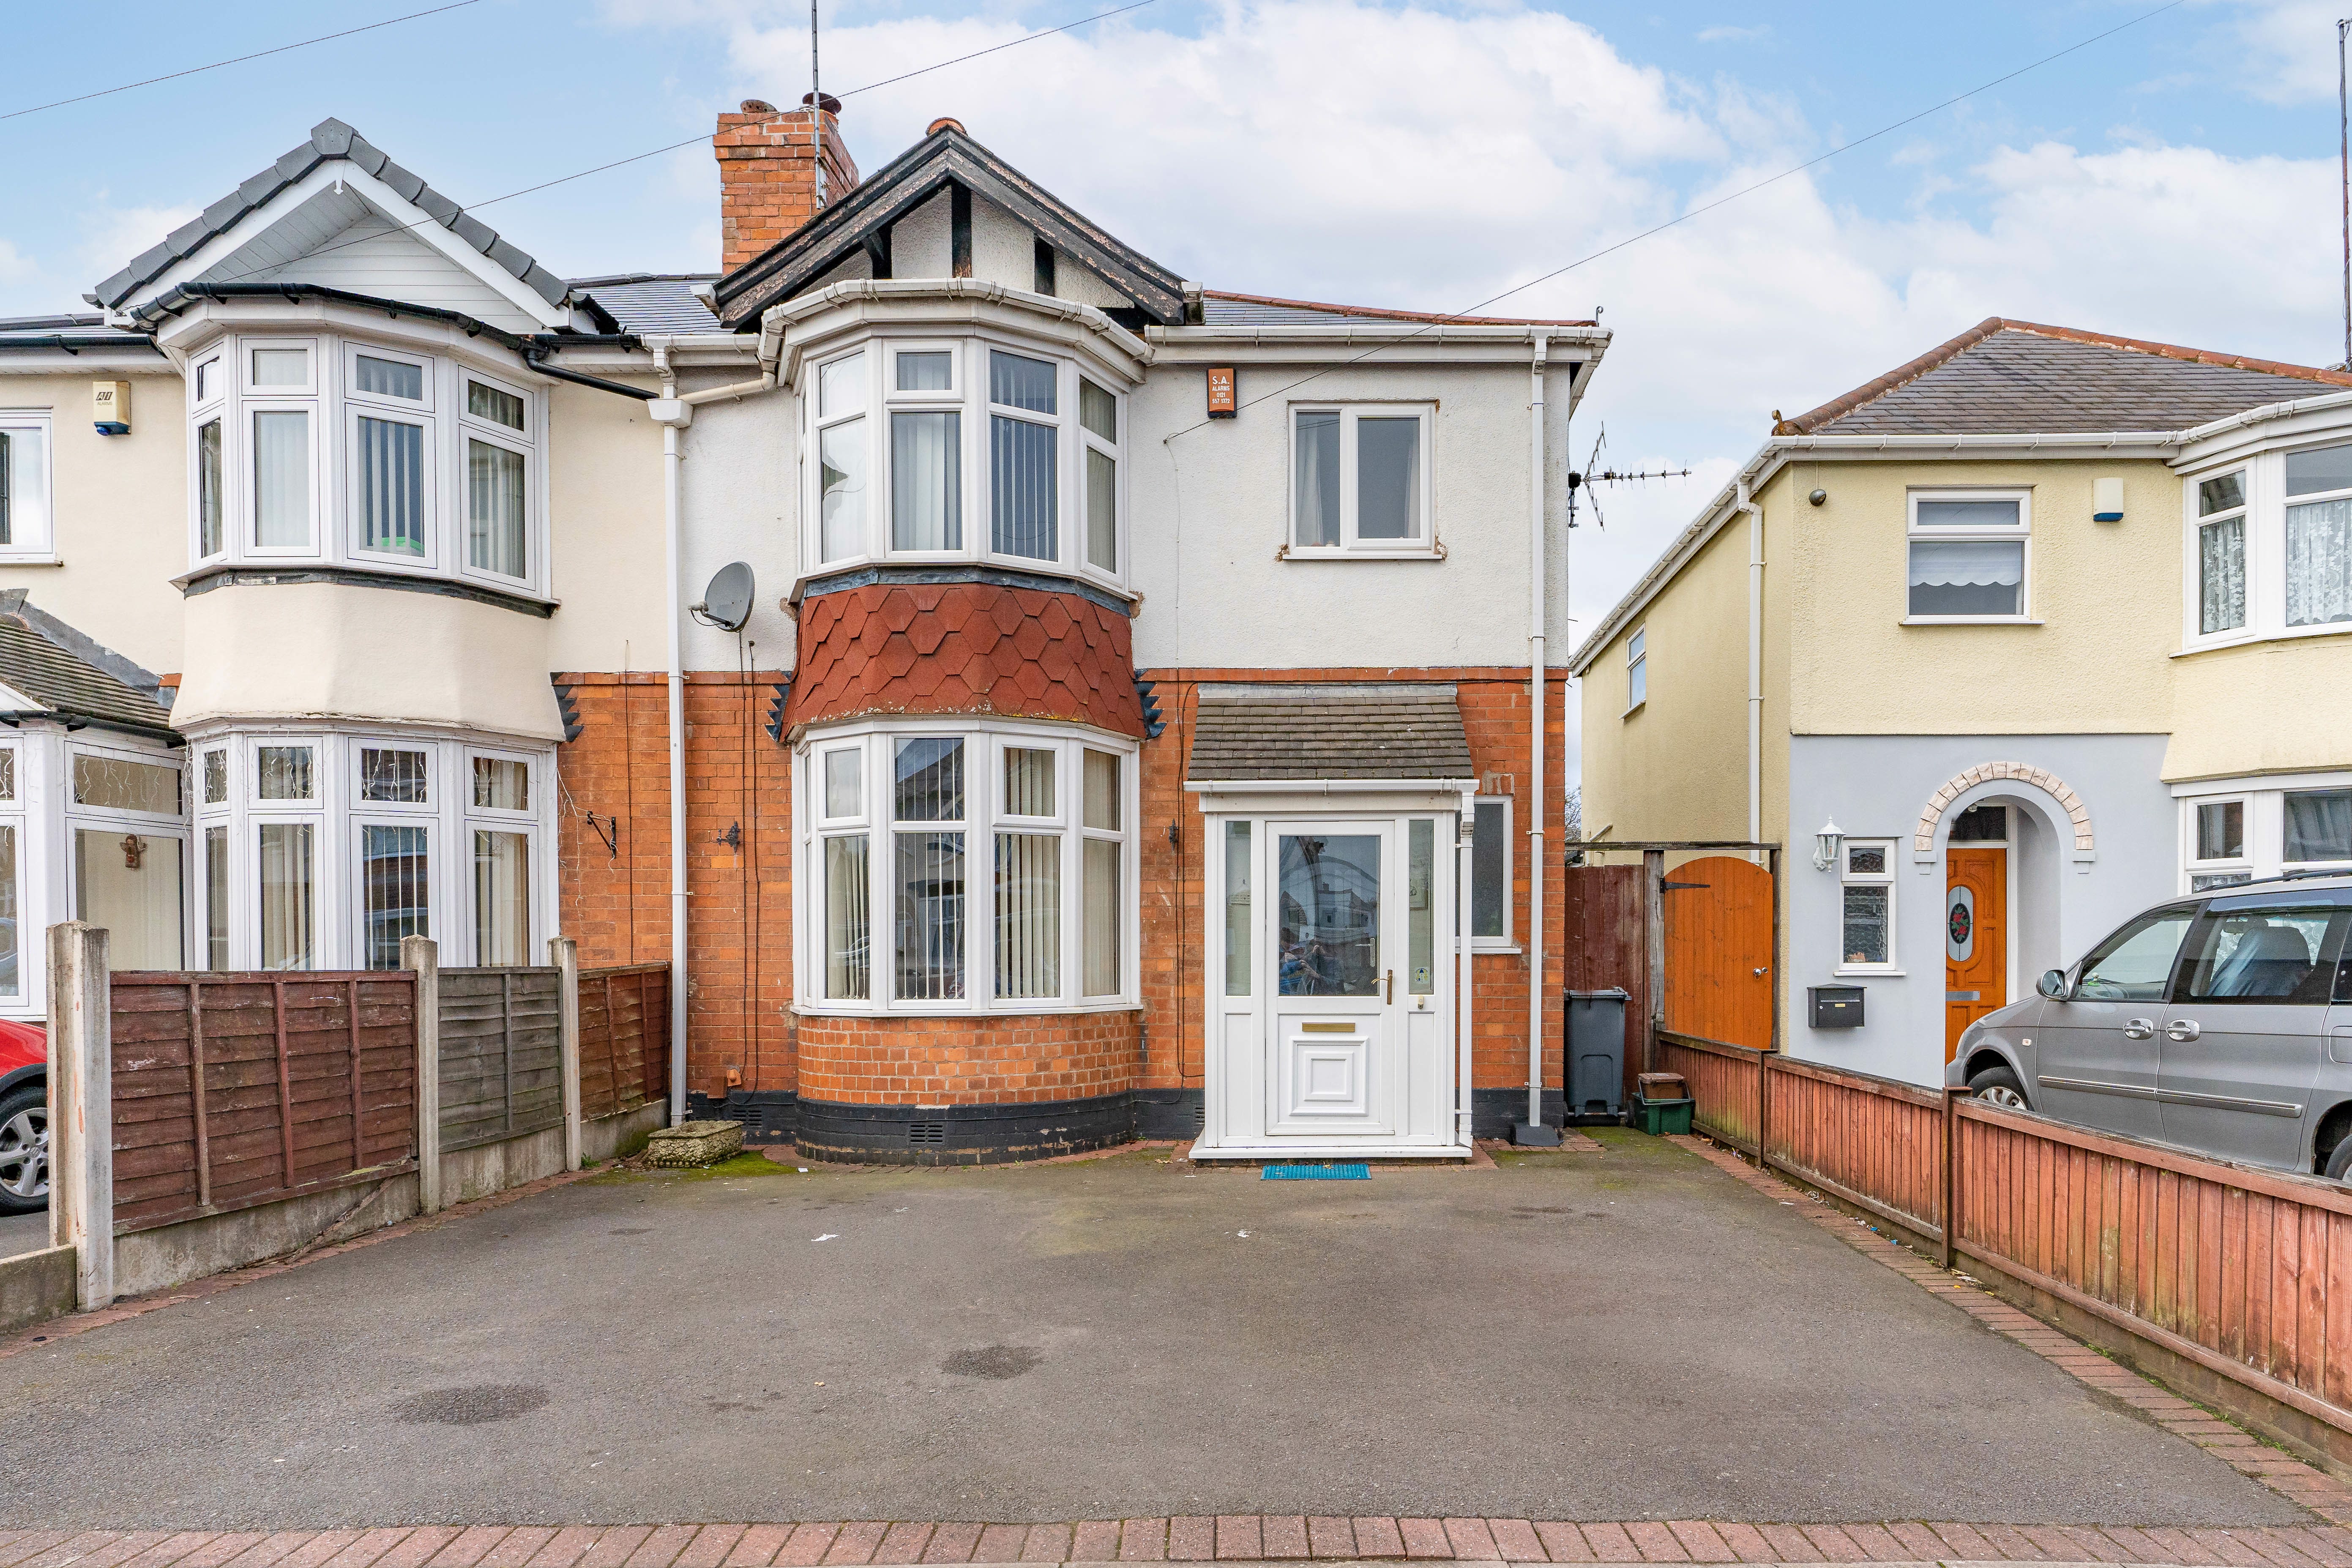 3 bed house for sale in Grafton Road, Oldbury  - Property Image 1